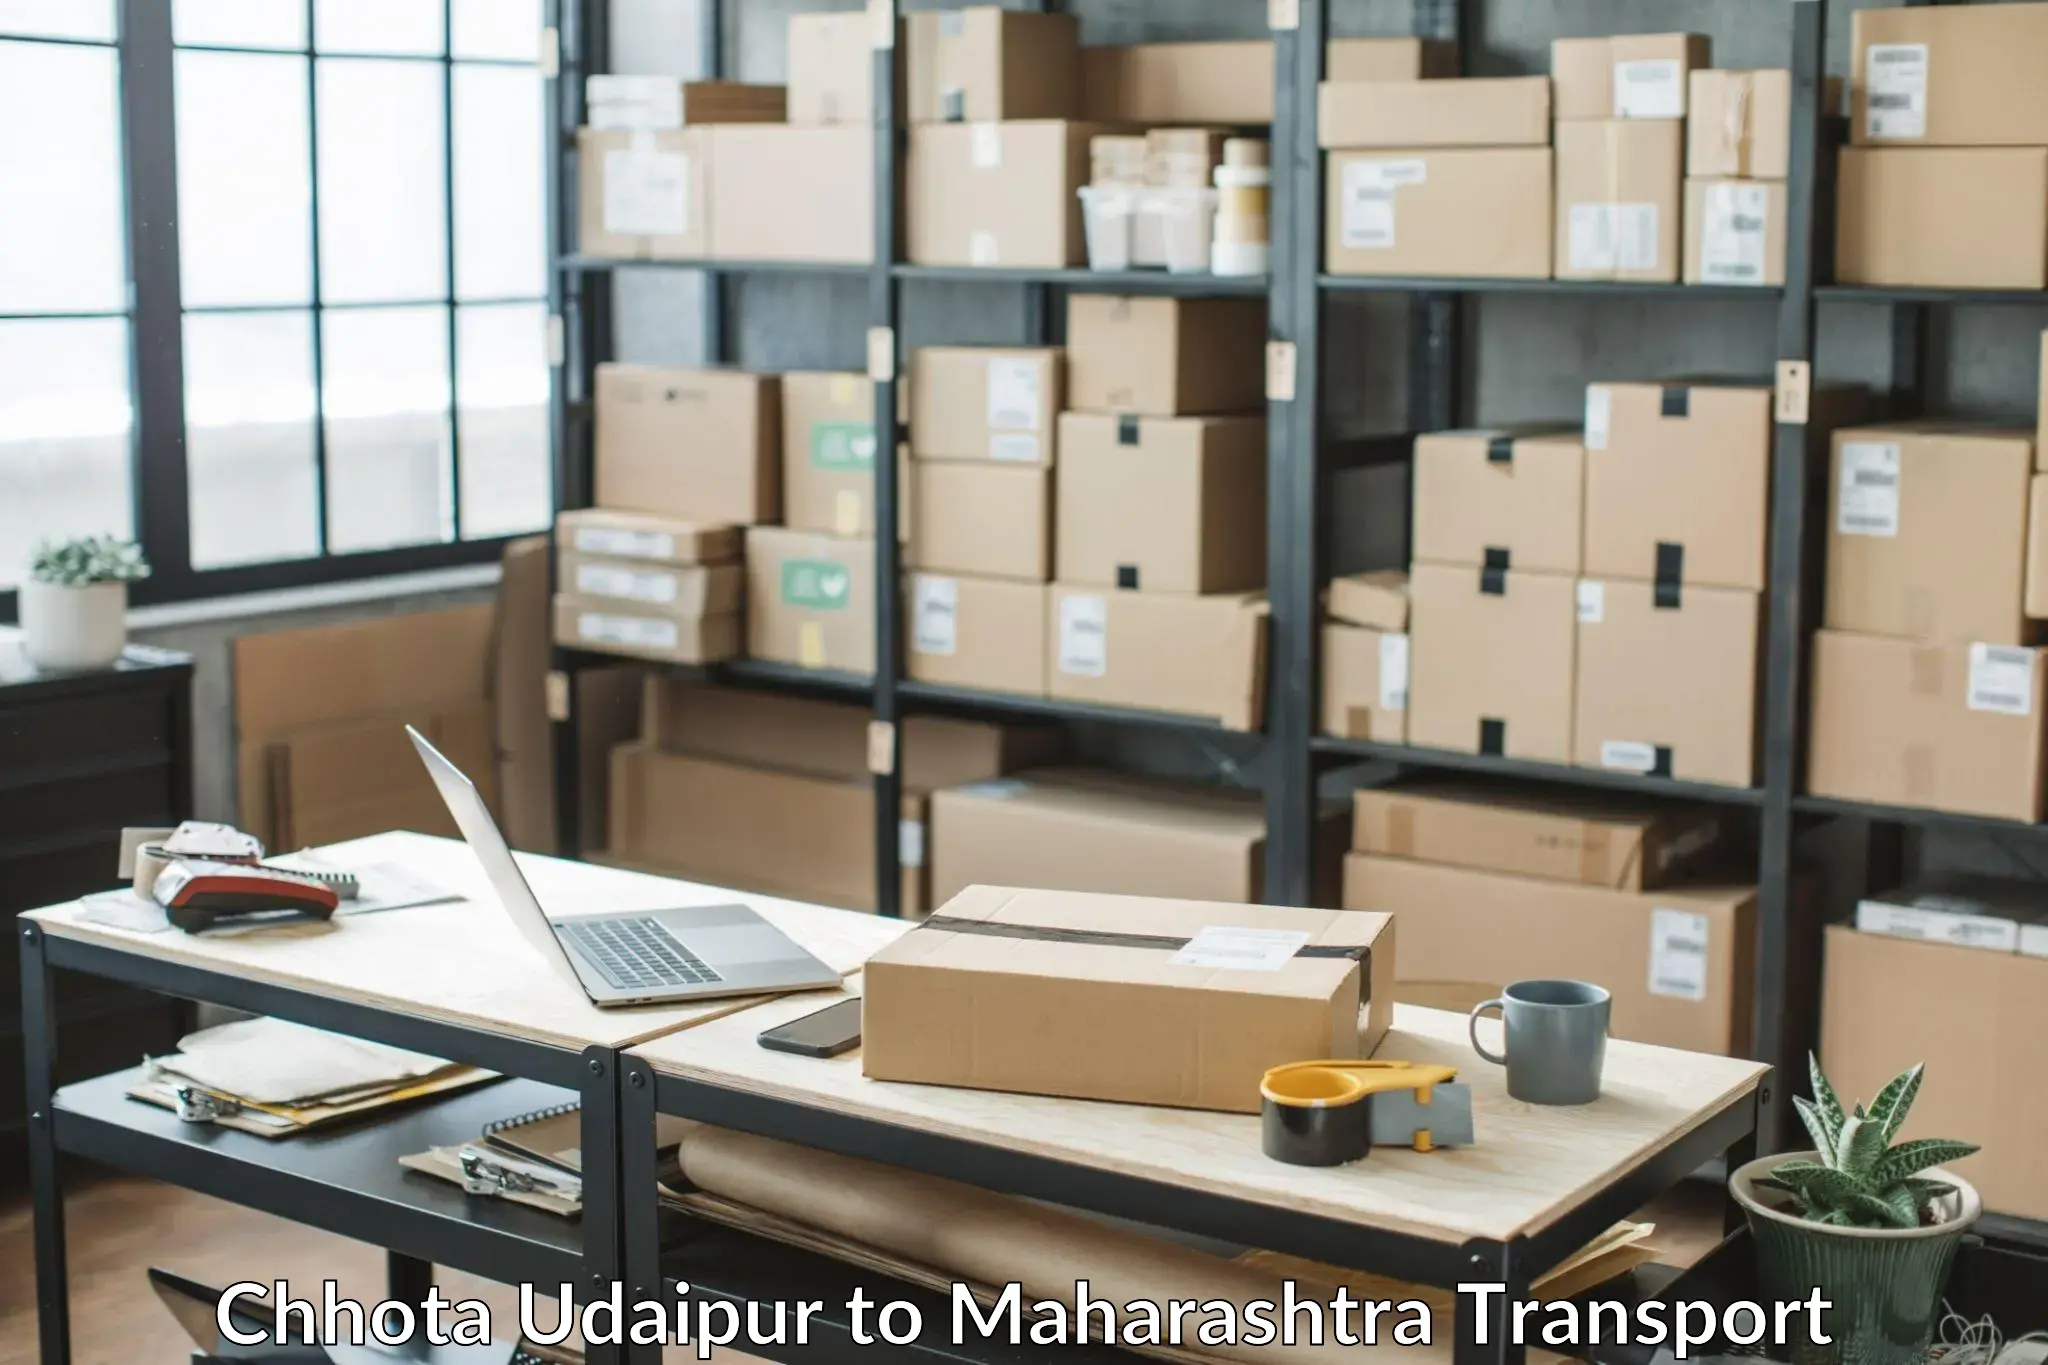 Truck transport companies in India Chhota Udaipur to Kalyan Dombivli